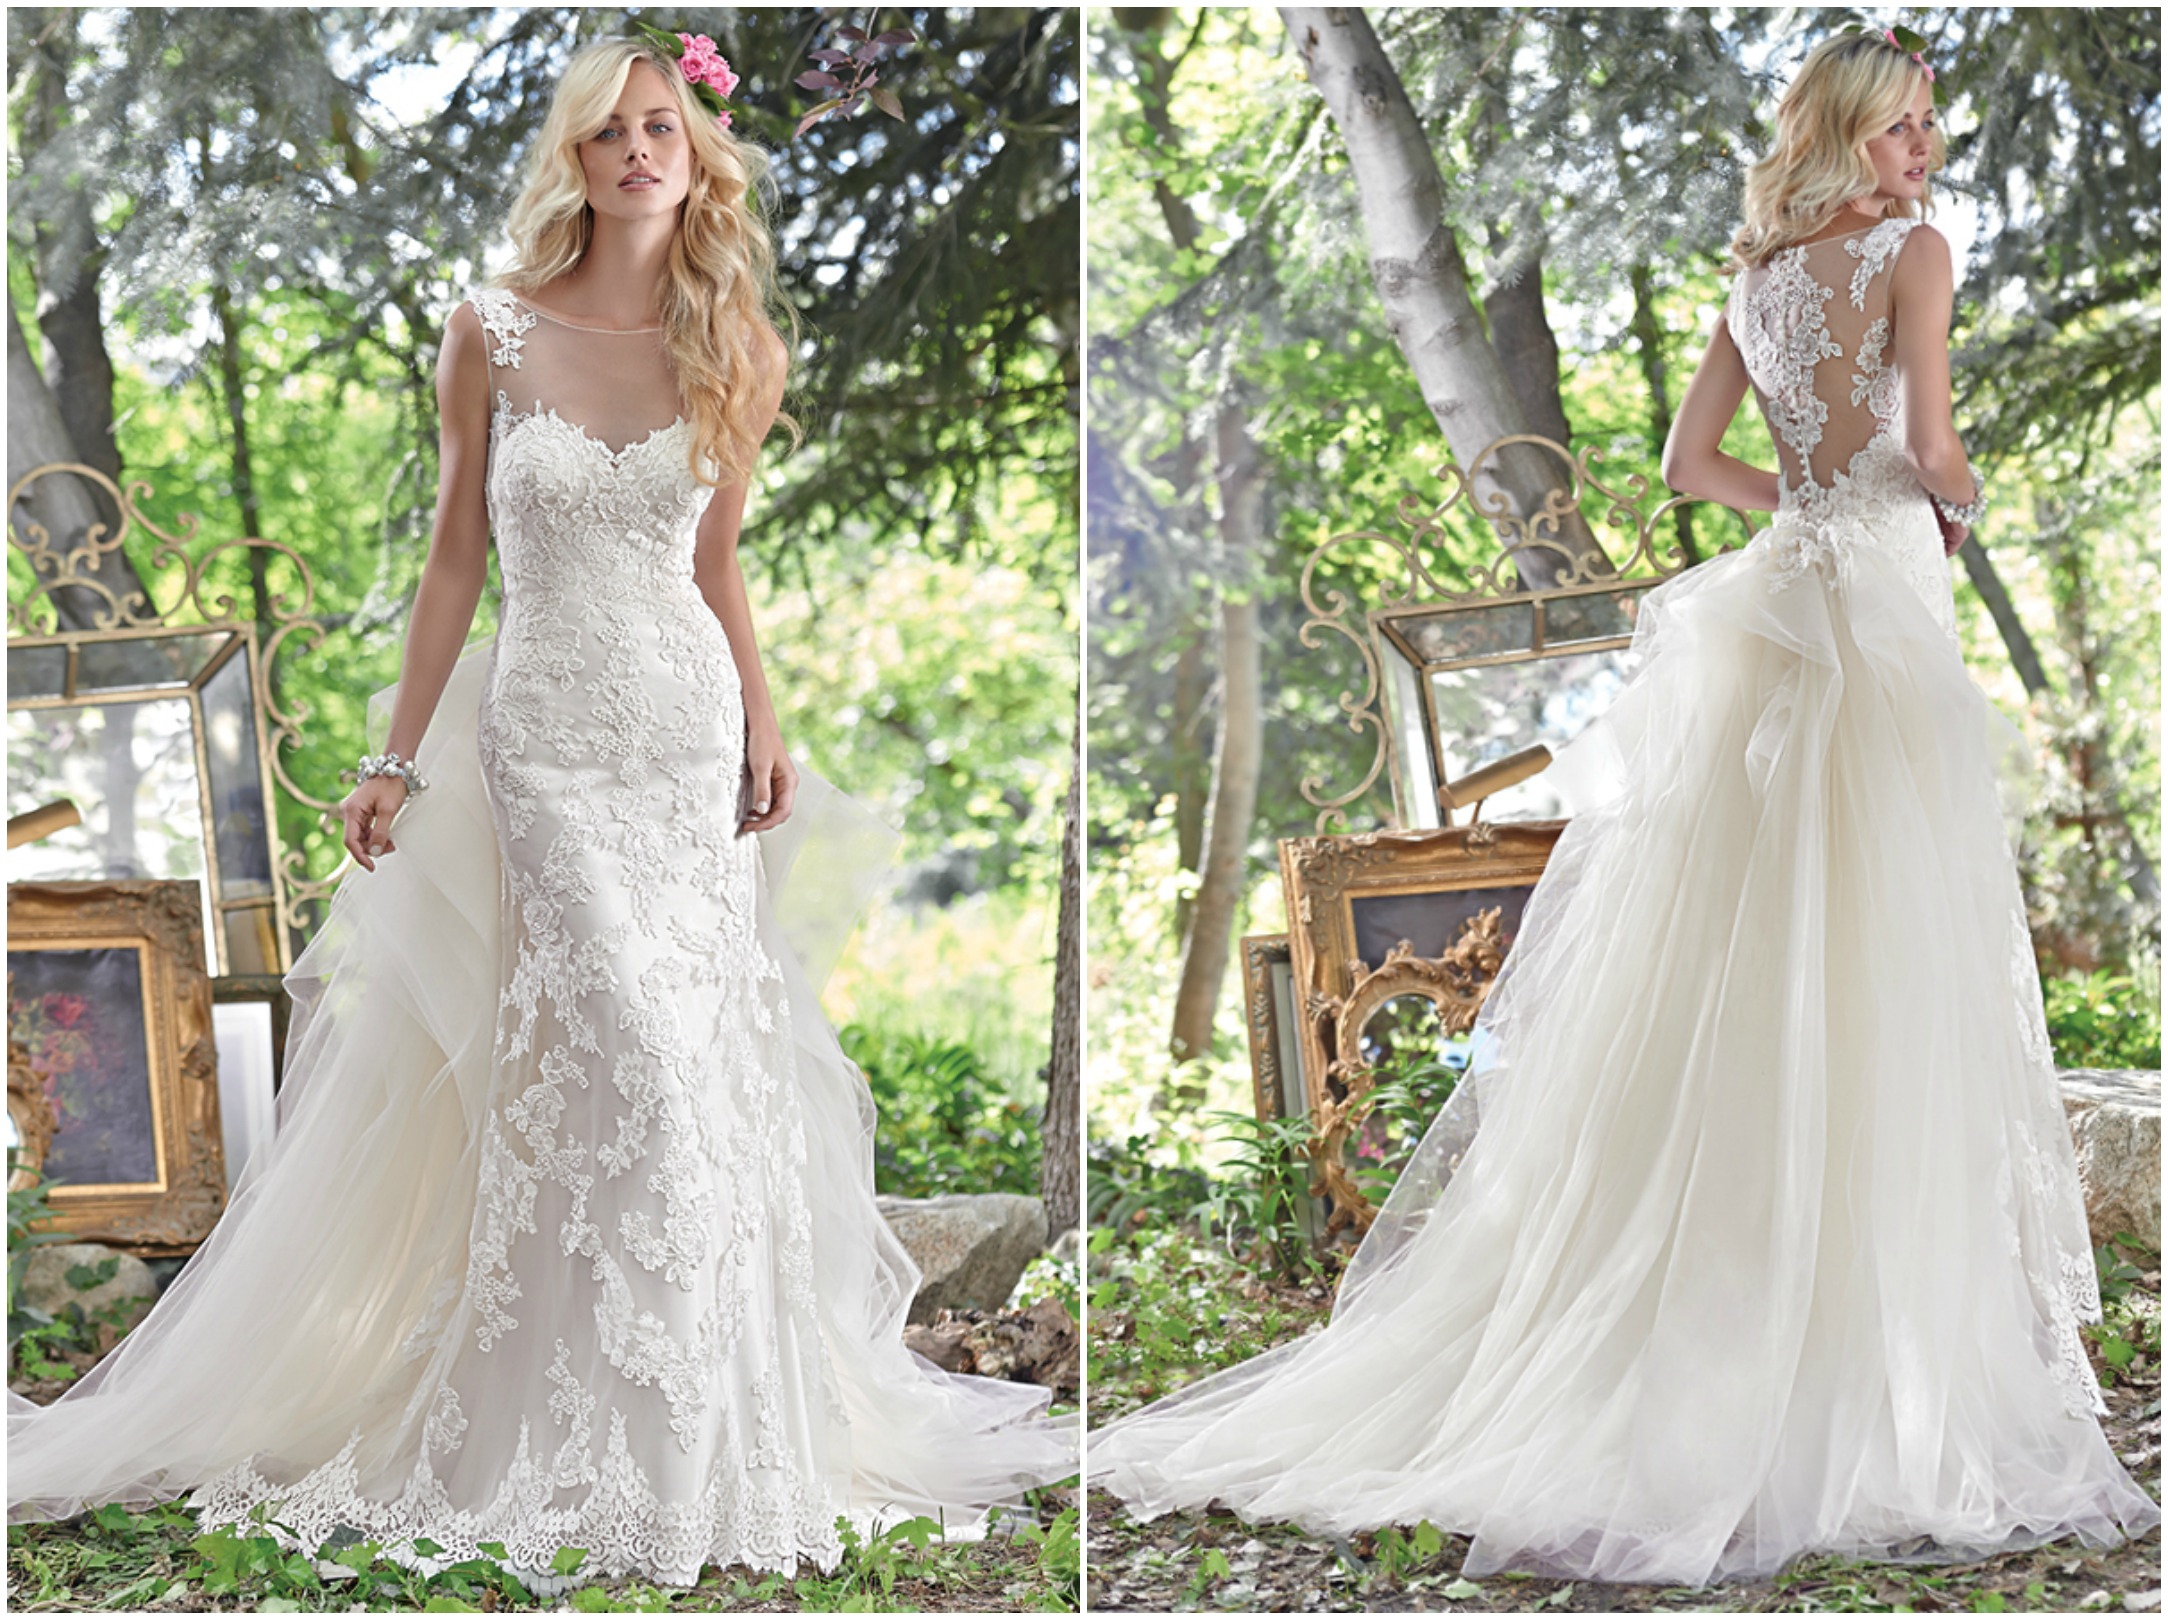 <a href="http://www.maggiesottero.com/maggie-sottero/jovi/9543" target="_blank">Maggie Sottero Spring 2016</a>